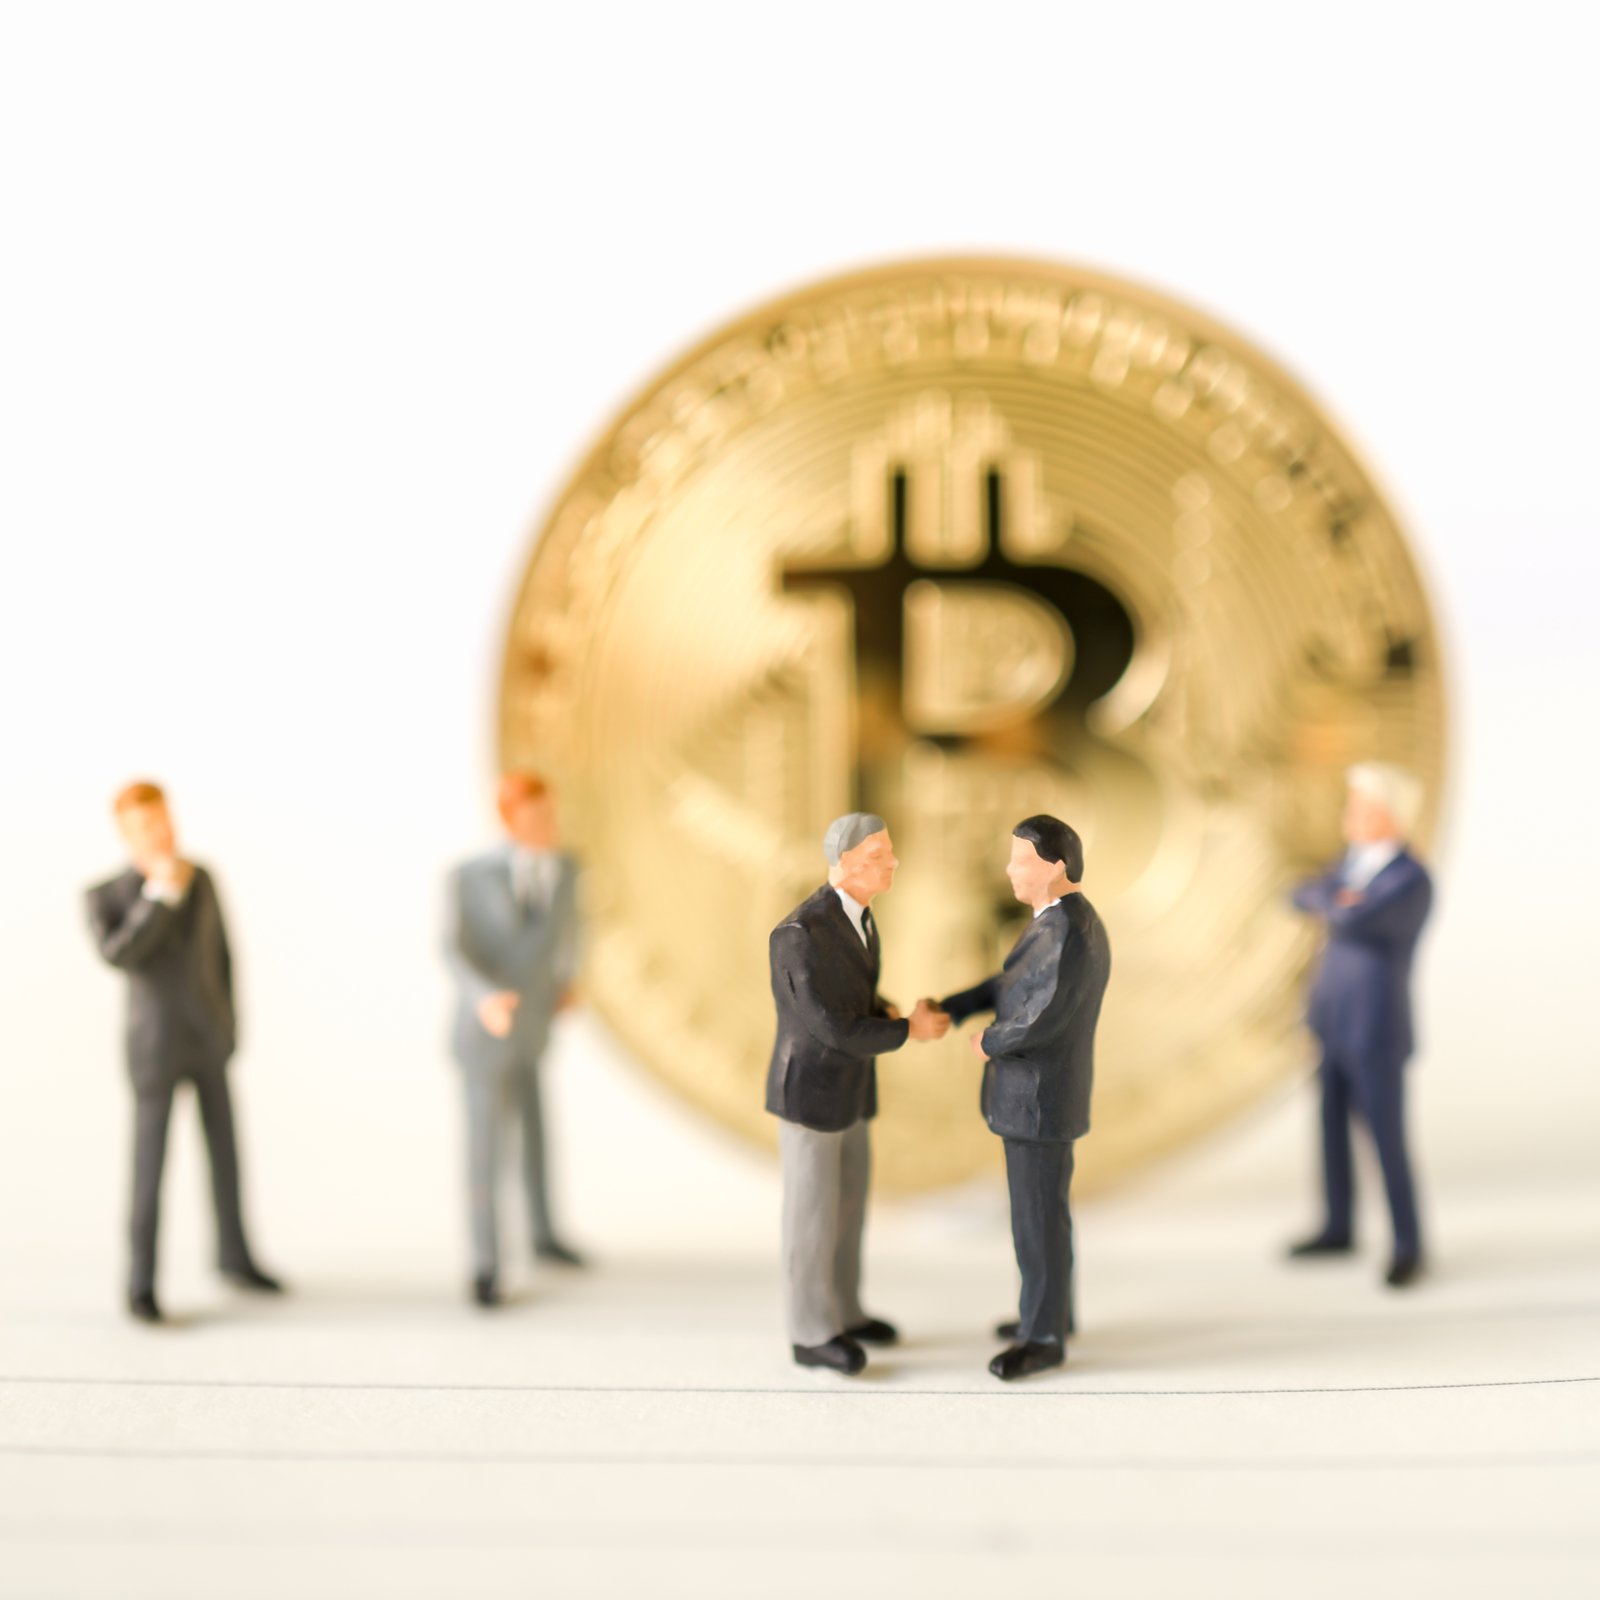 bitcoin investment companies in uk bitcoin investing good or bad